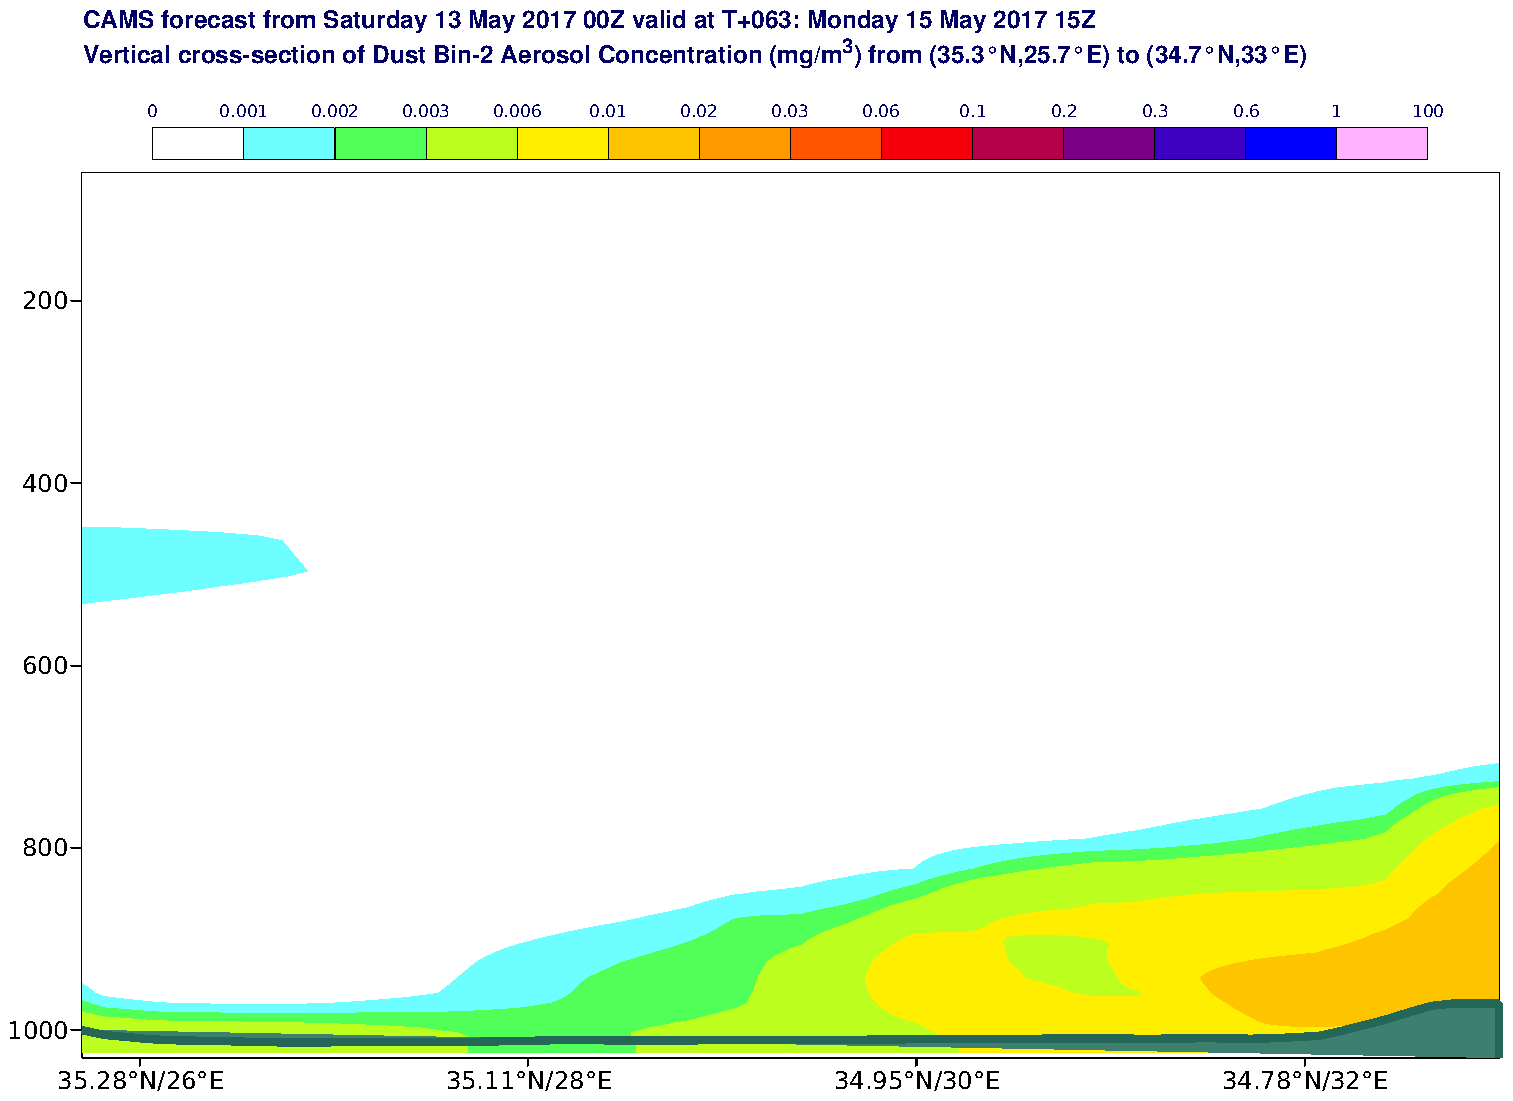 Vertical cross-section of Dust Bin-2 Aerosol Concentration (mg/m3) valid at T63 - 2017-05-15 15:00